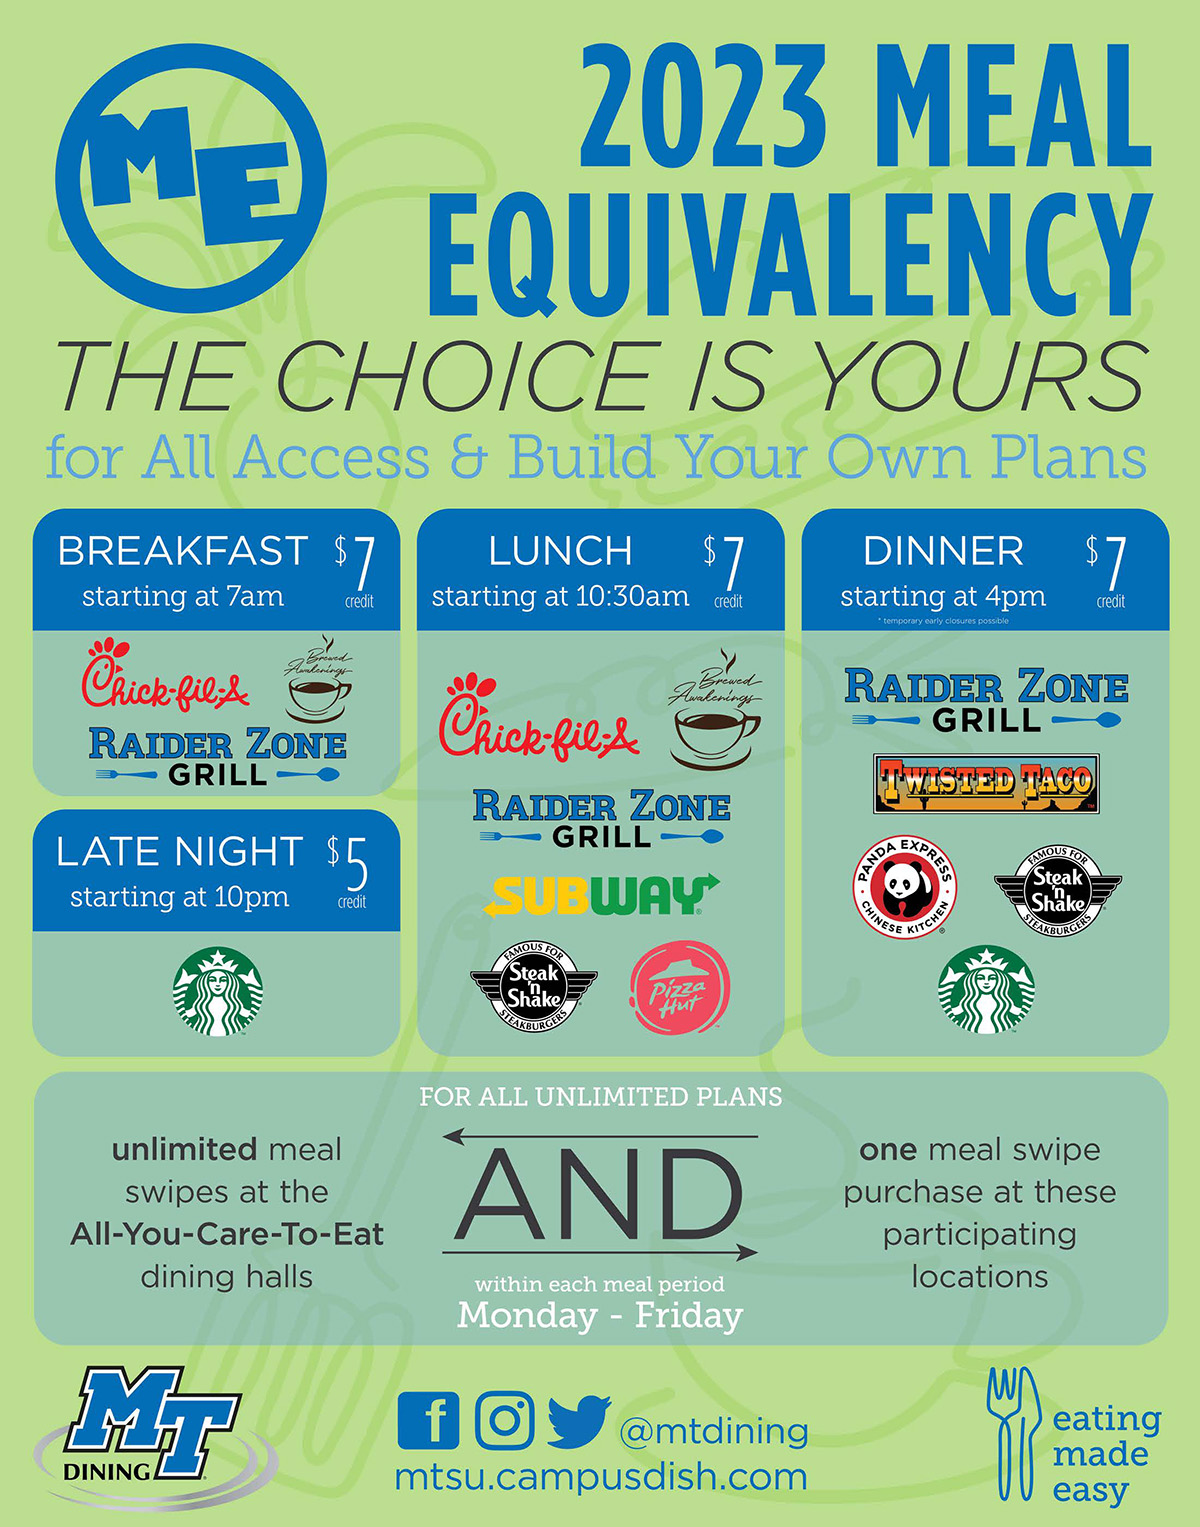 The 2023 Meal Equivalency guide.